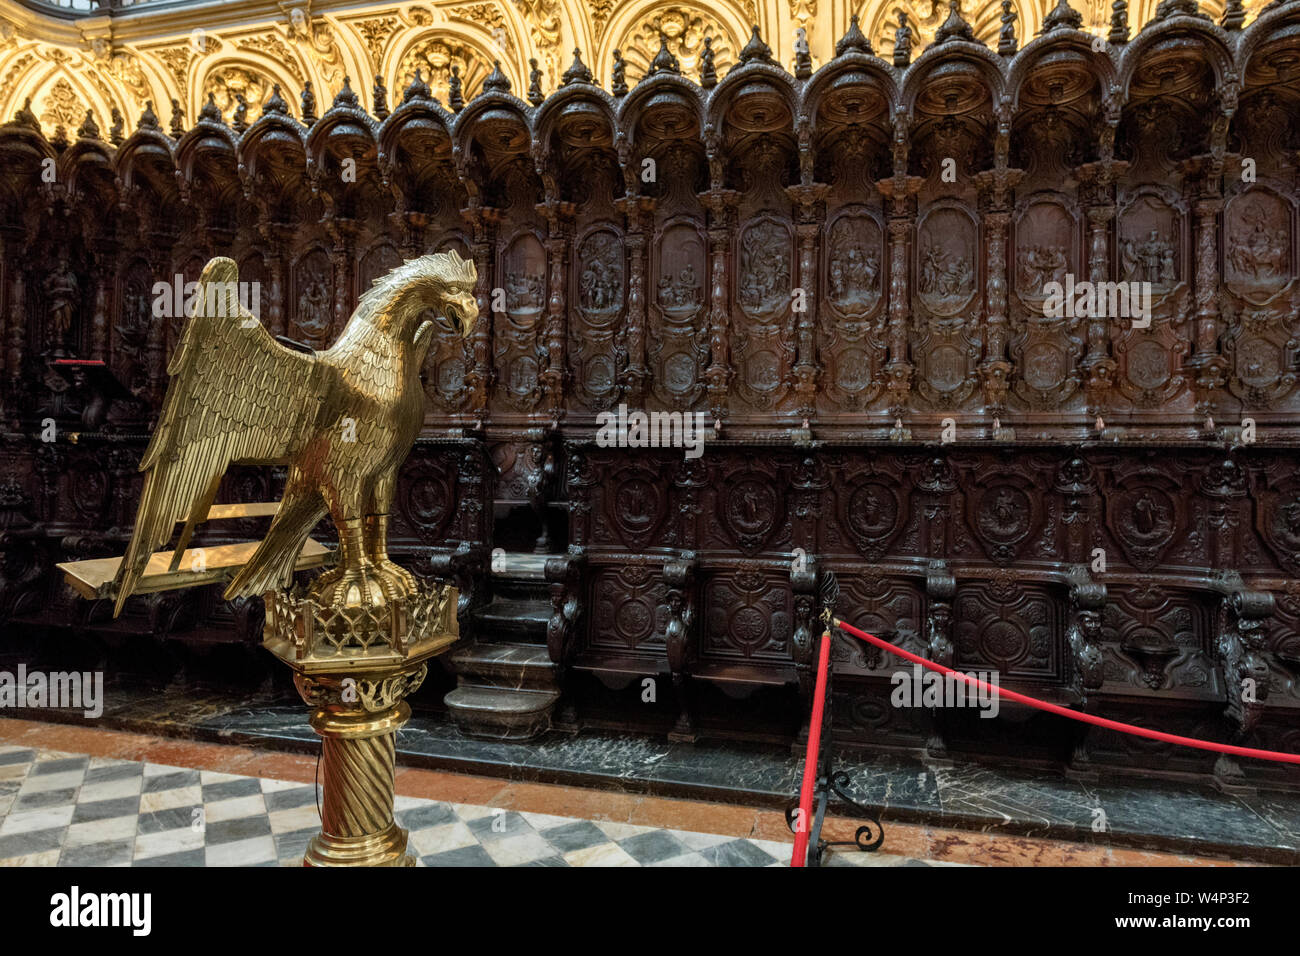 Choir stalls by Pedro Duque Cornejo in The Mosque Cathedral of Cordoba, also called the Mezquita, in Cordoba, Andalucia, Spain Stock Photo